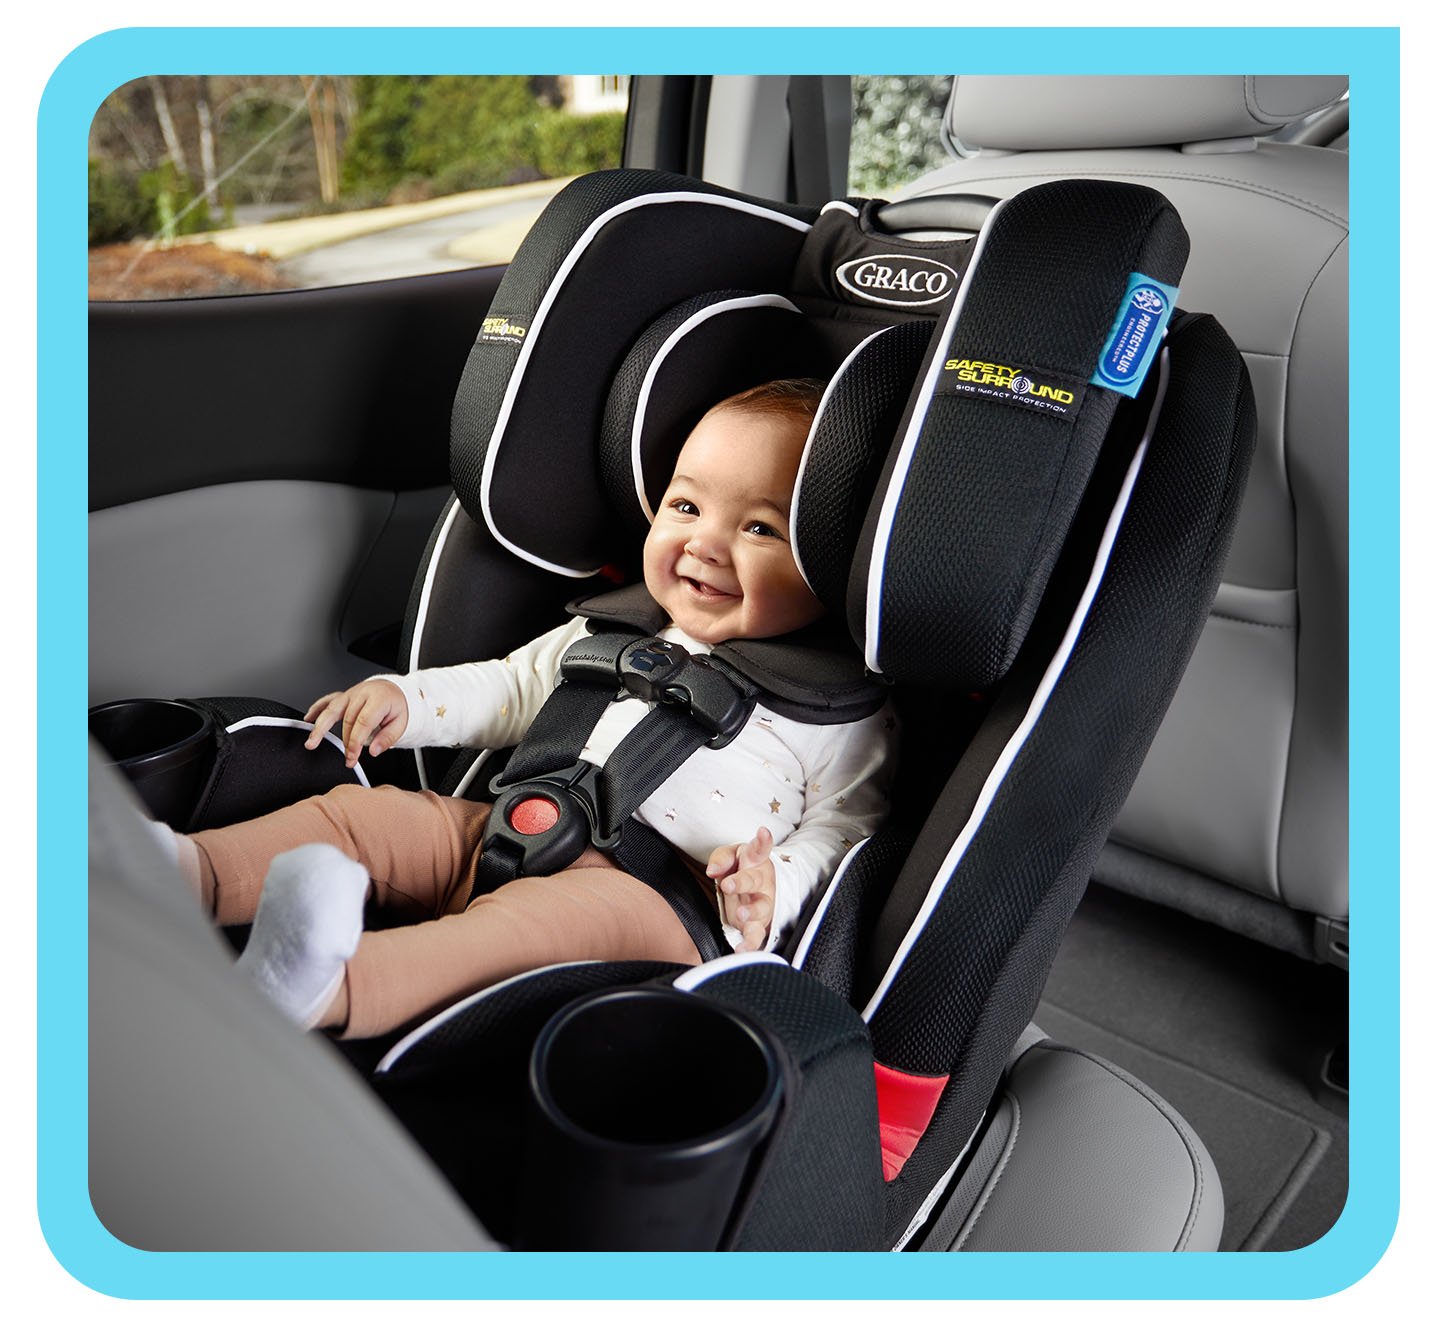 Graco's Car Seat Safety Standards | Graco